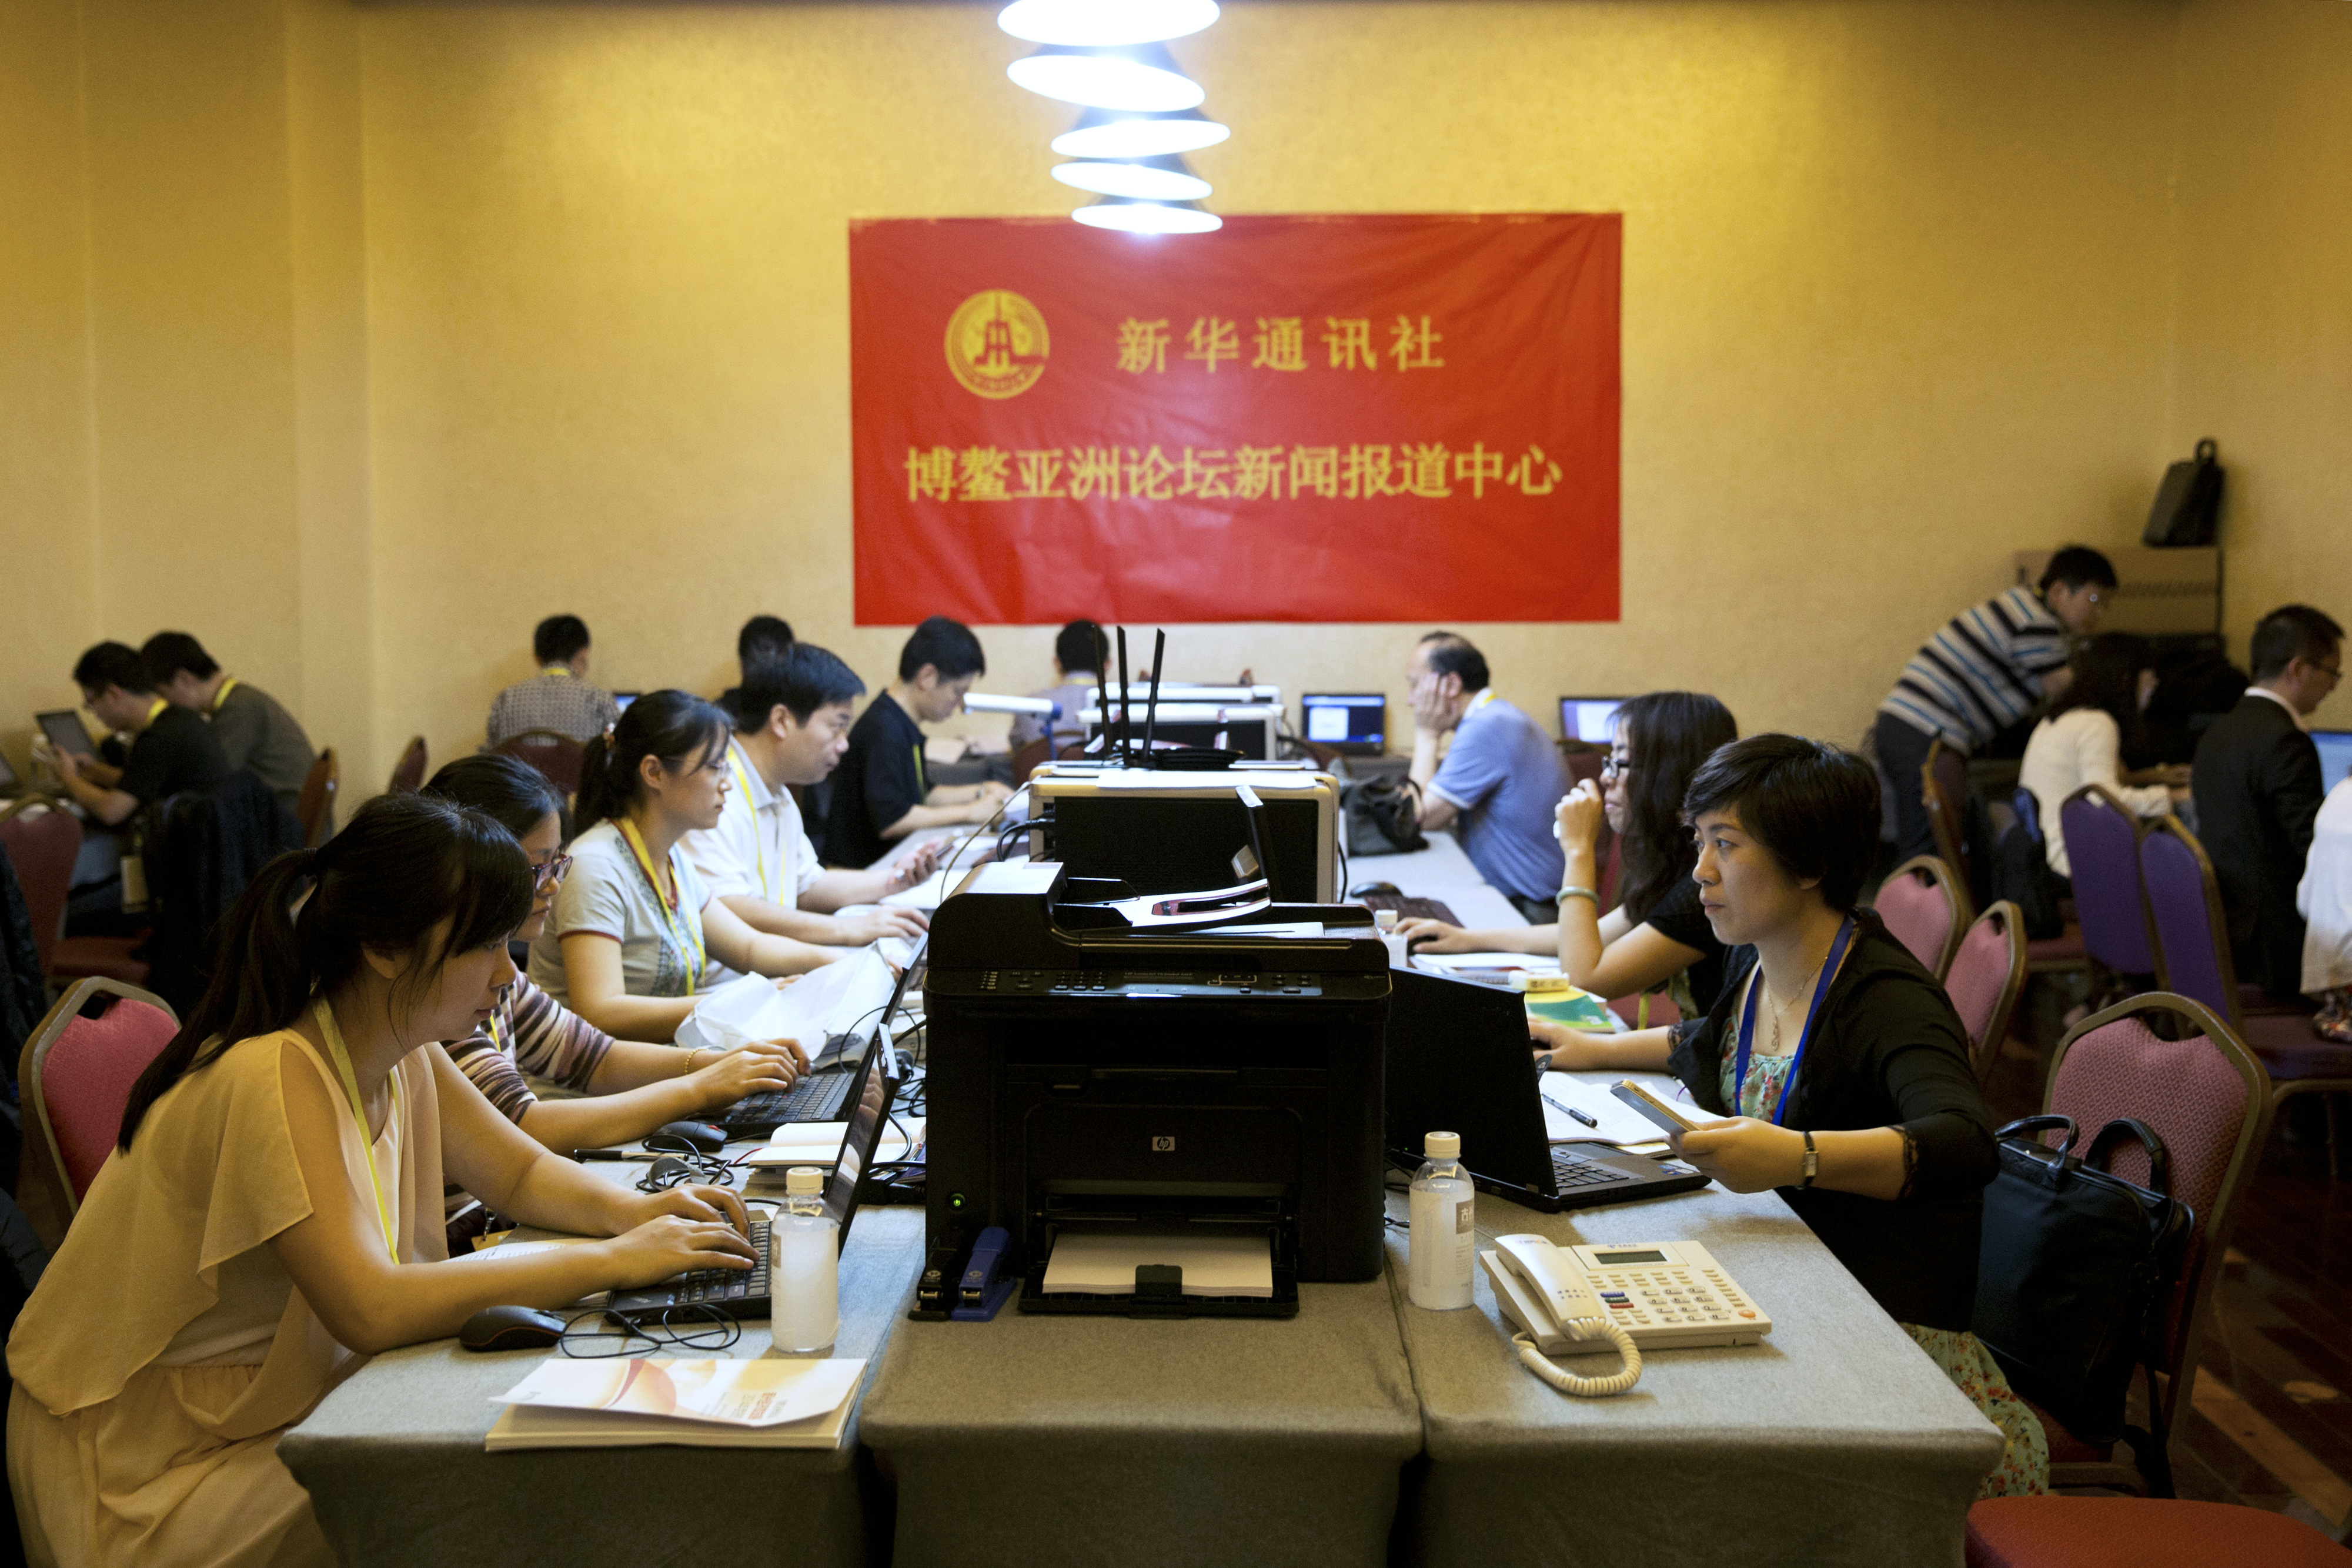 Reporters work at computers in the Xinhua press room at the Boao Forum for Asia conference in Boao, China, on April 8, 2014 (Bloomberg—Bloomberg via Getty Images)